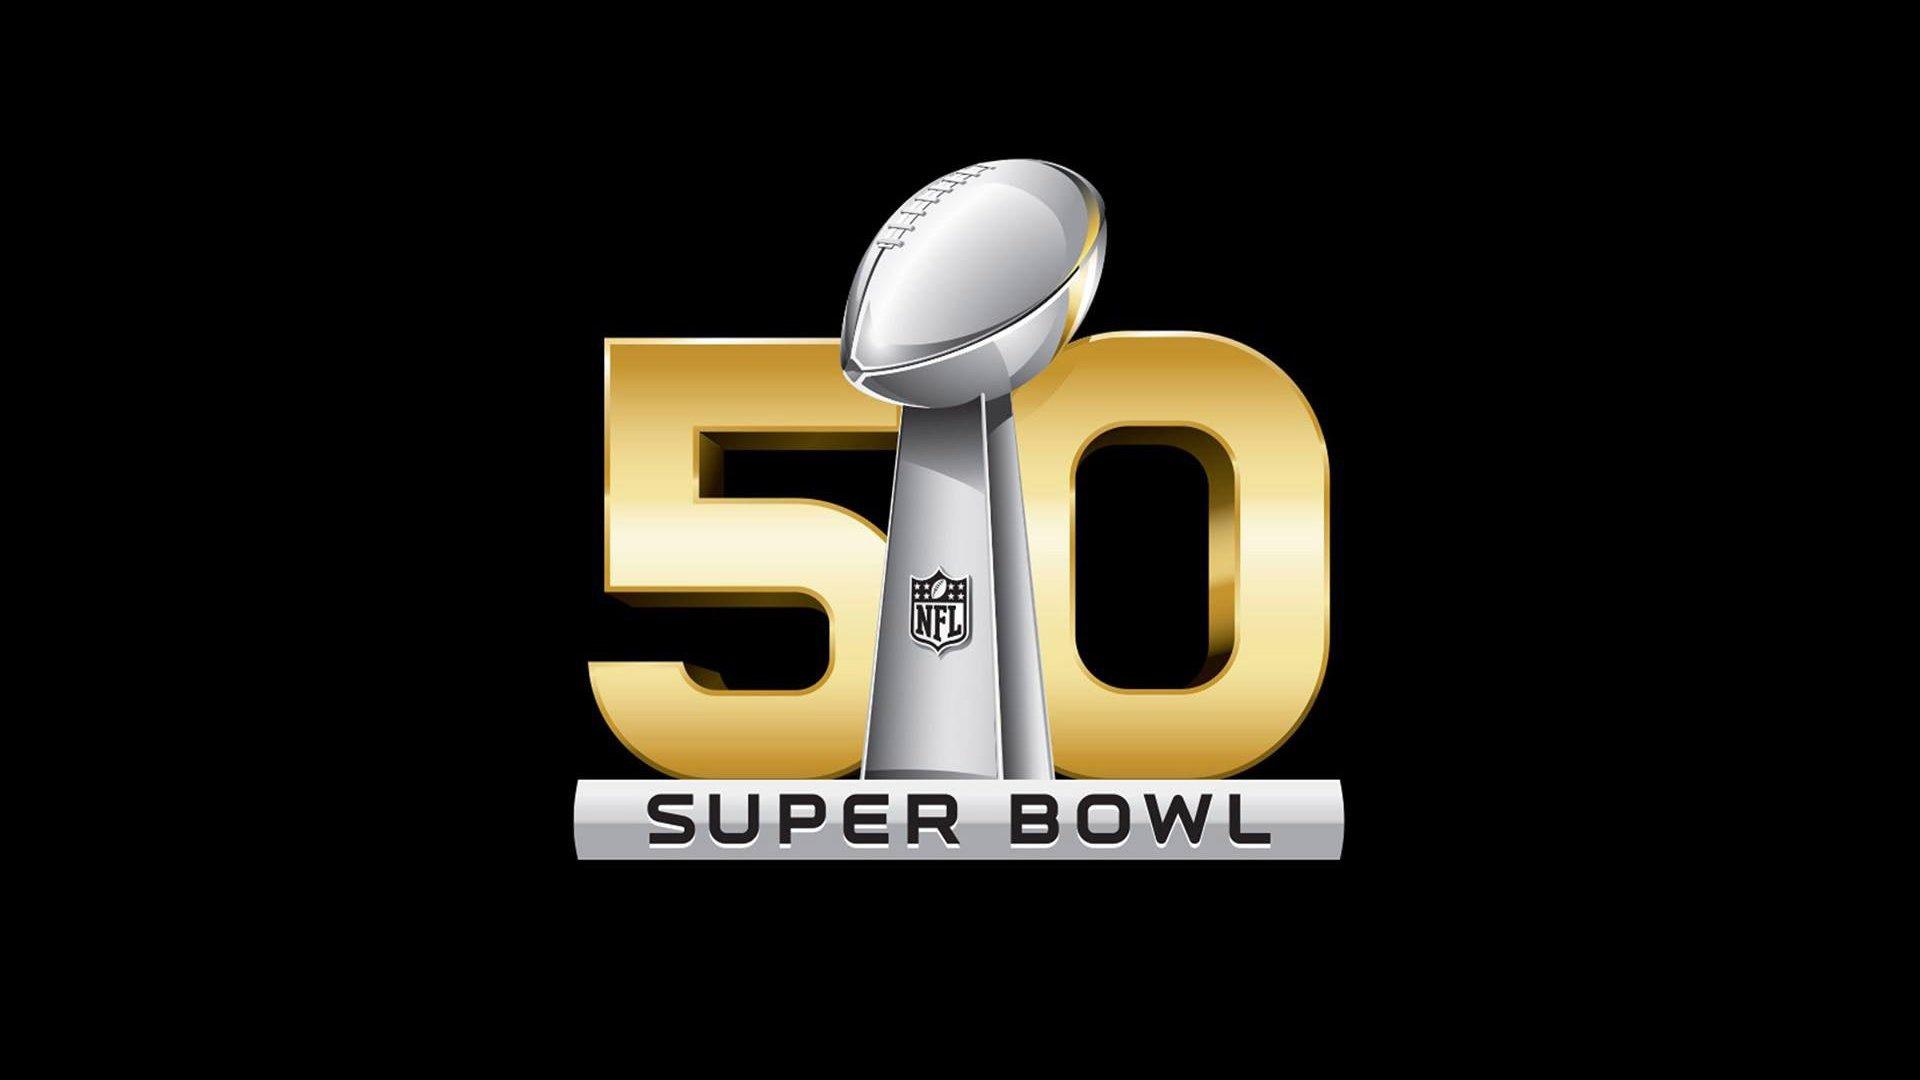 Wallpaper Blink of Superbowl Wallpaper HD for Android